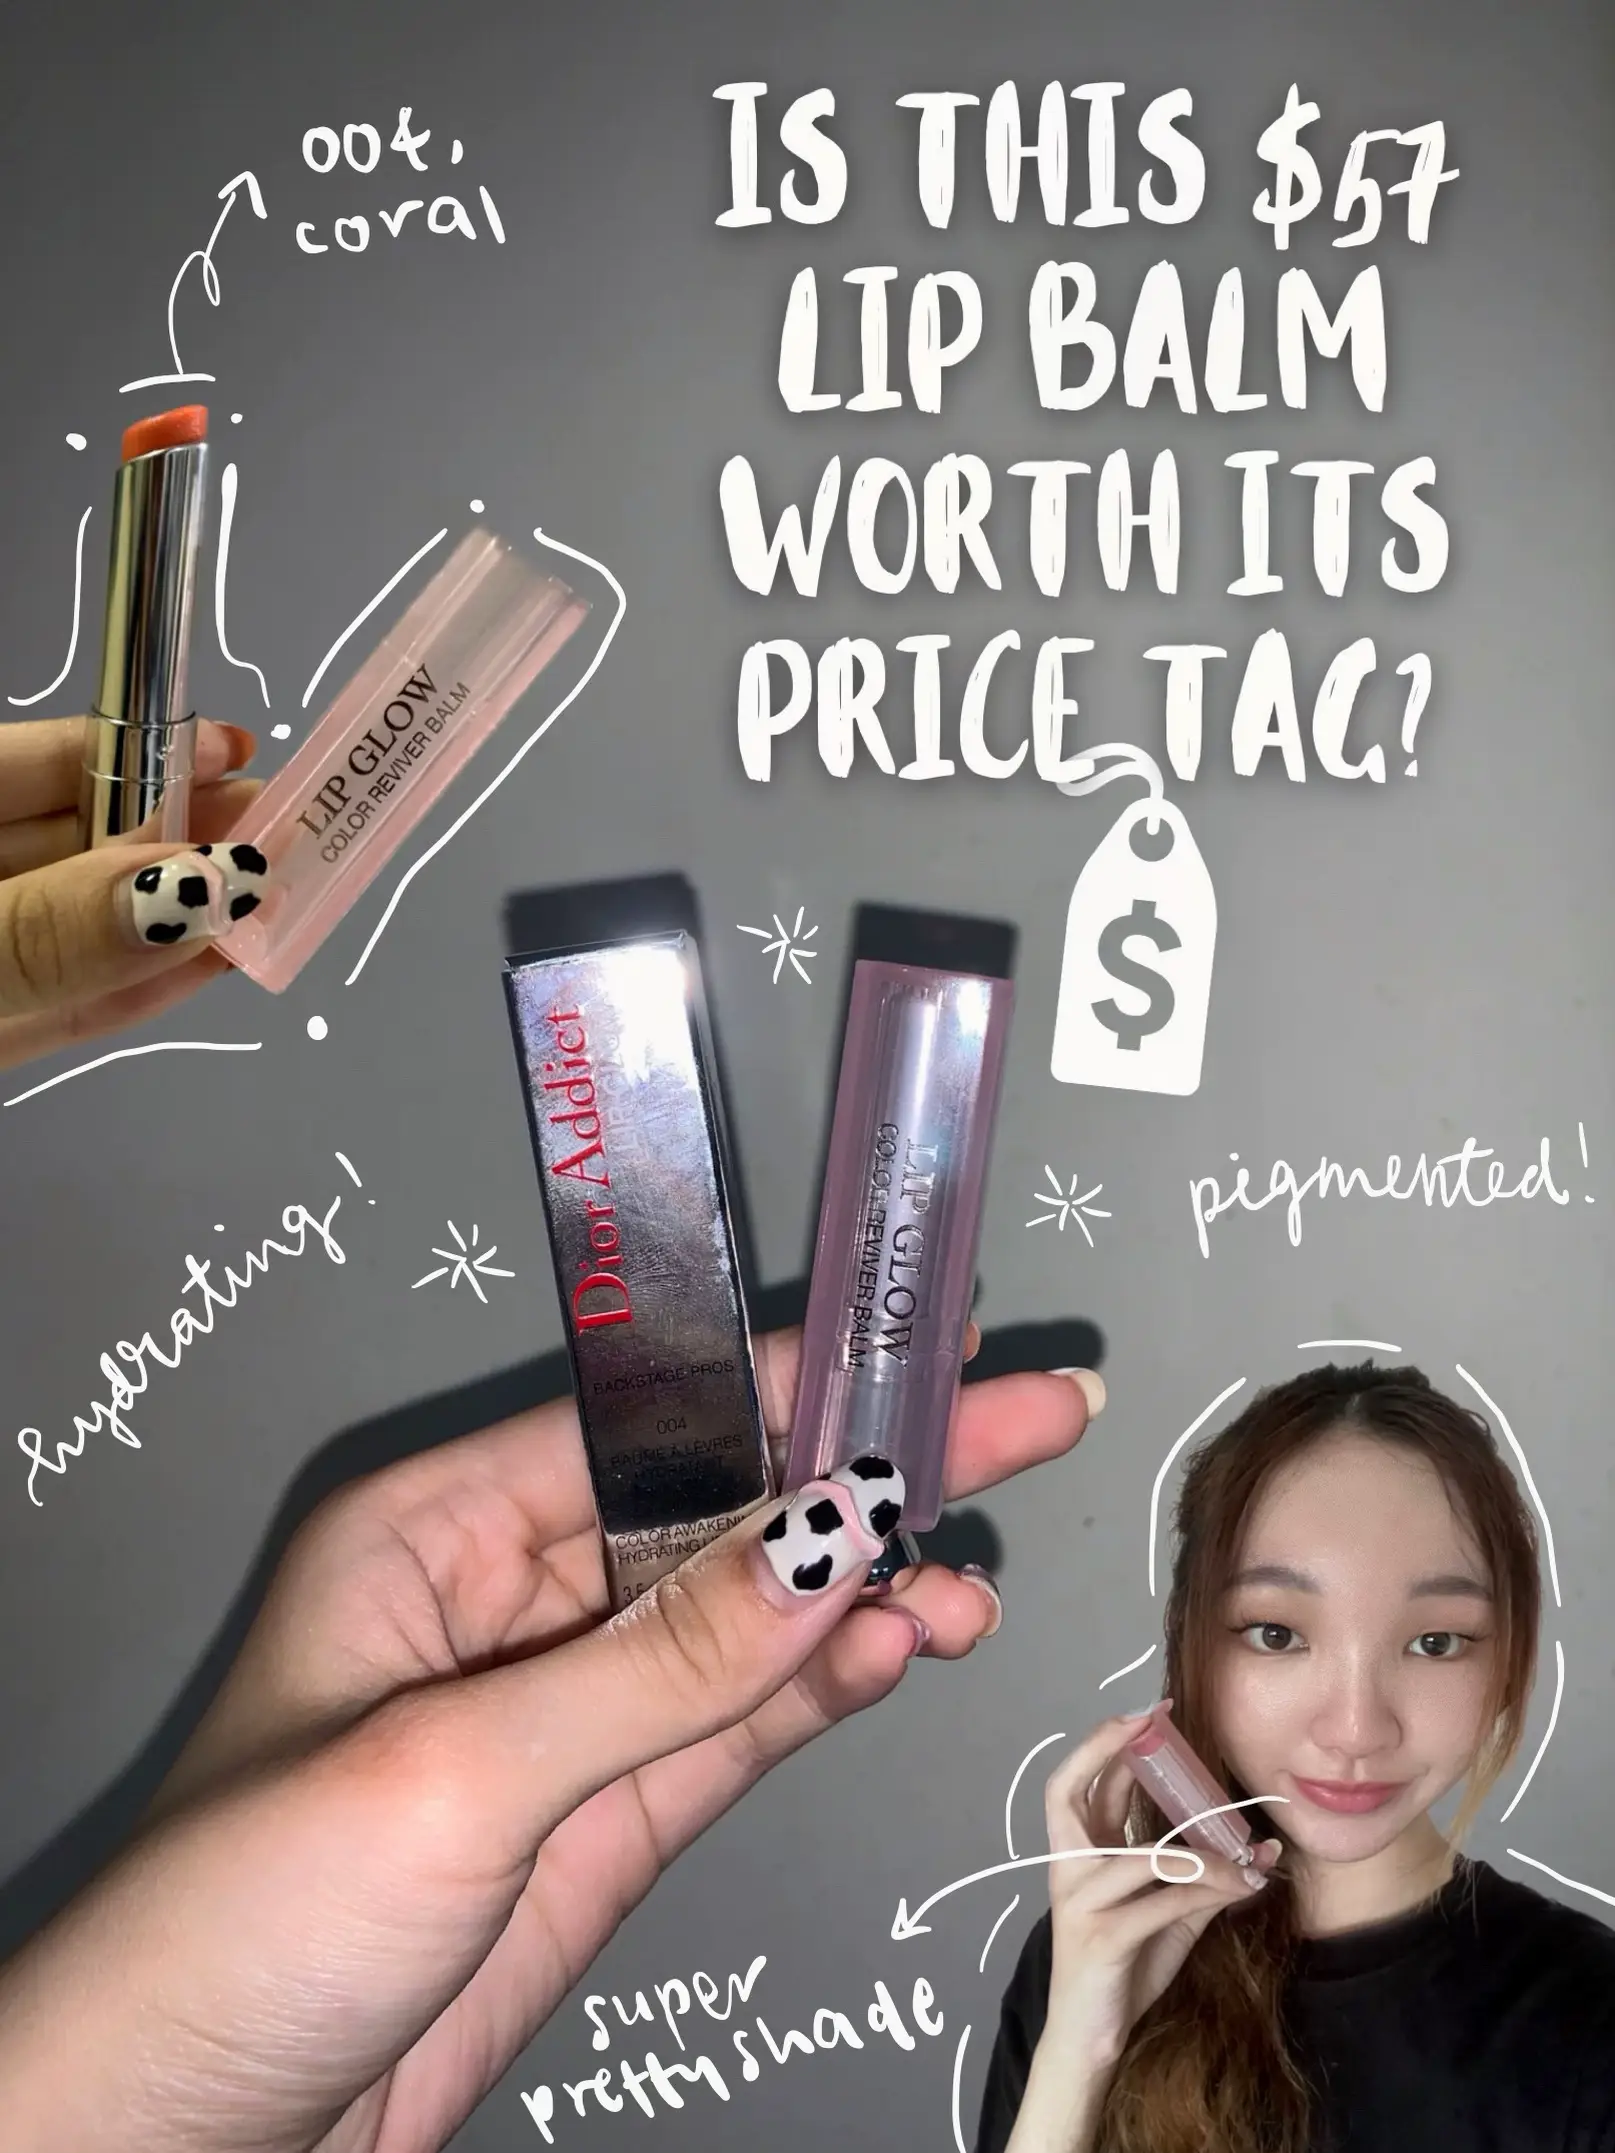 GlowUp with ✨Dior lip glow✨ | $57 lip balm ?! | Gallery posted by Jeslyn ✨  | Lemon8